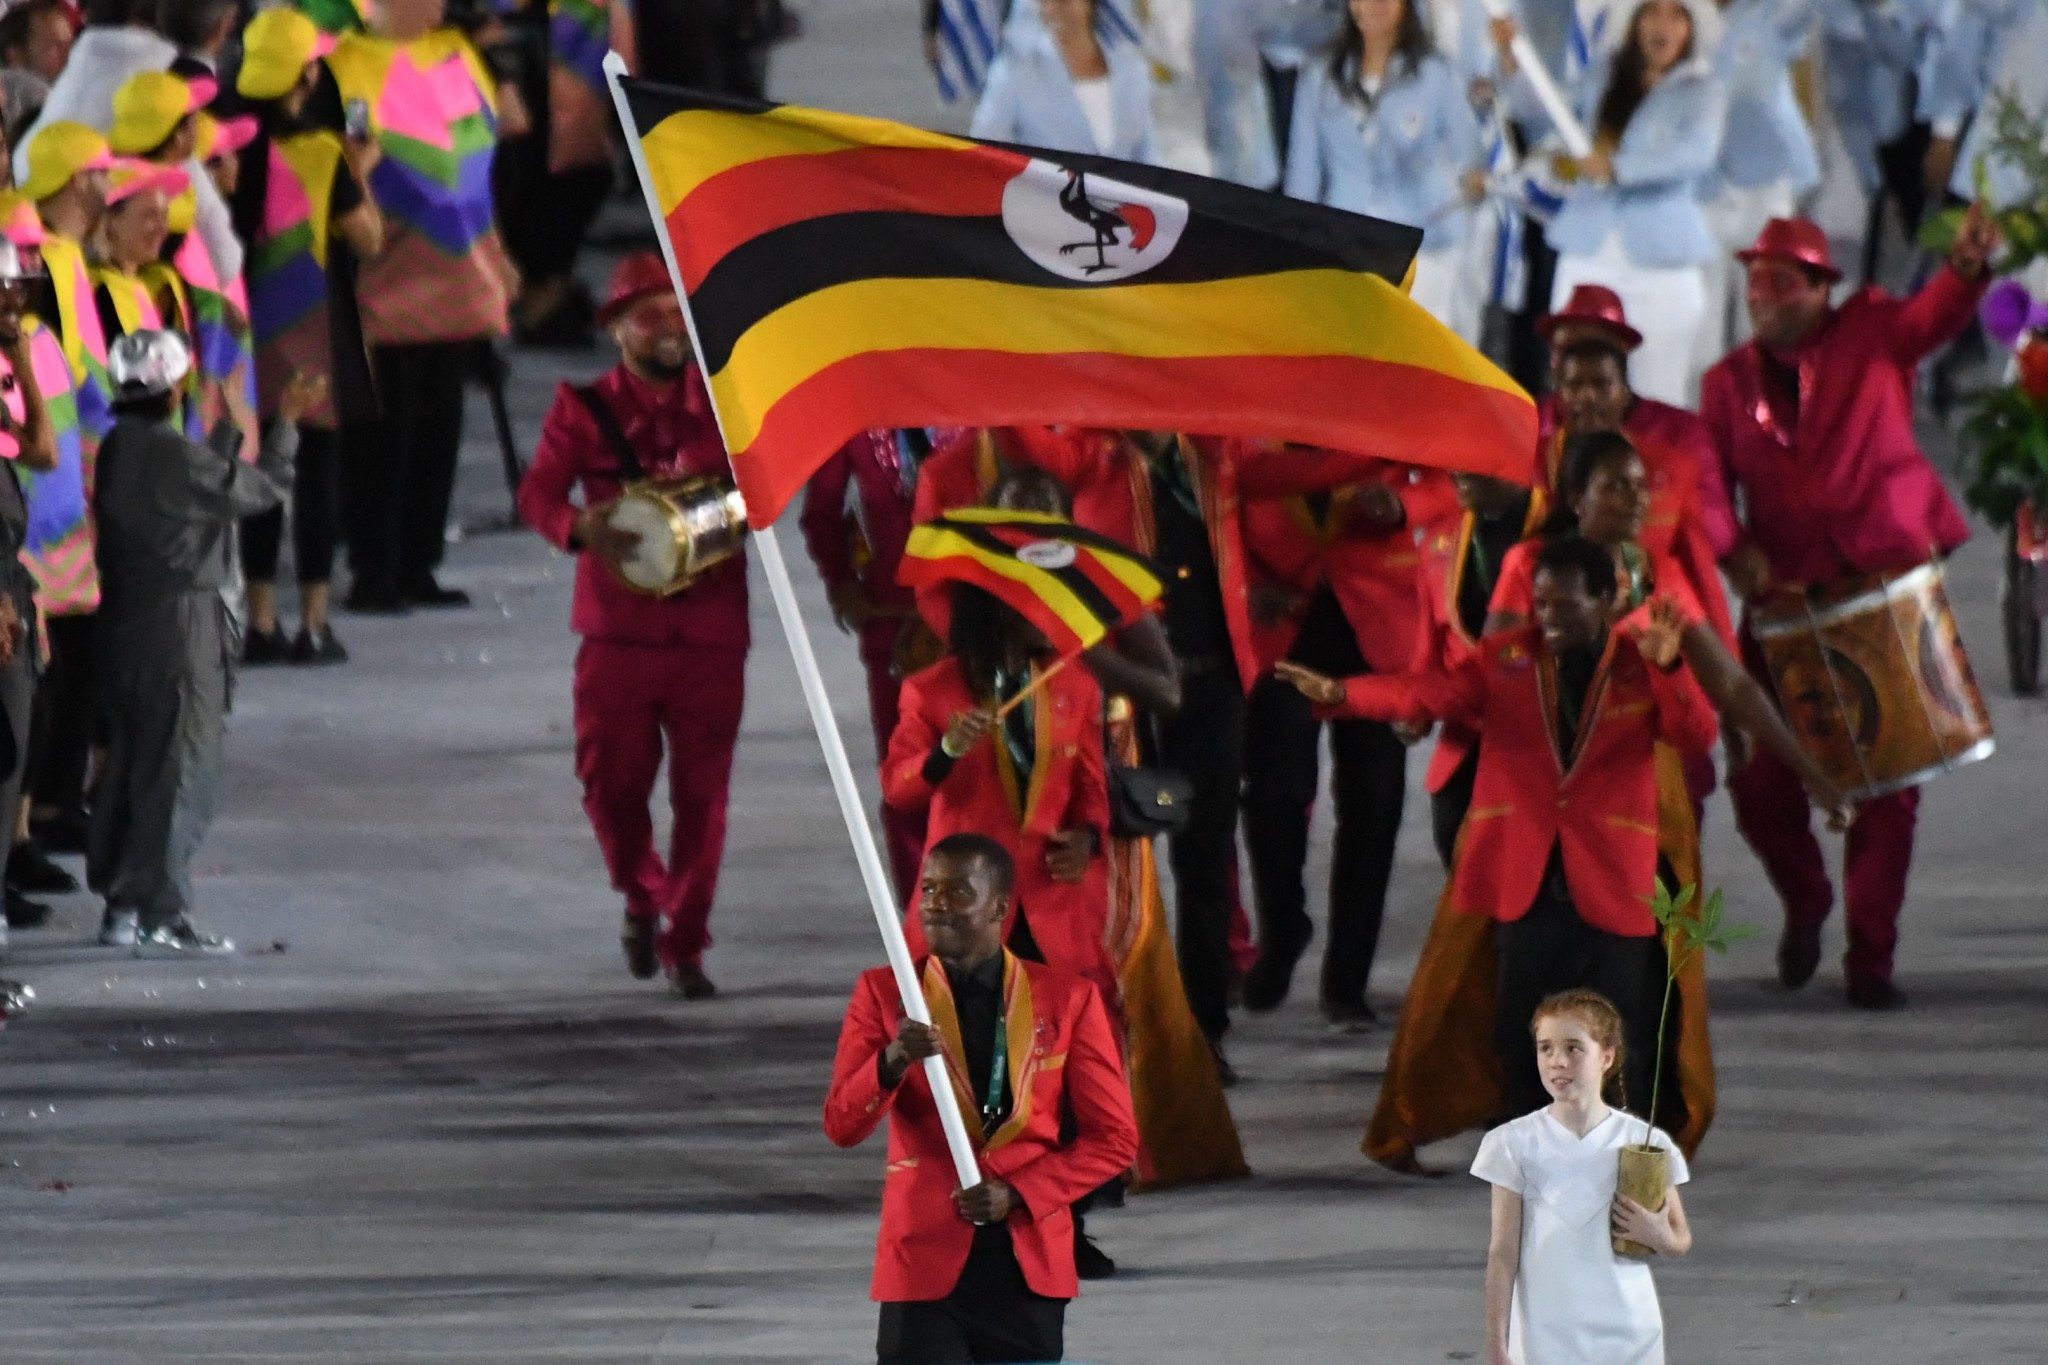 Ugandan athletes marching in the Opening Ceremony of the Rio 2016 Olympic Games ©Getty Images